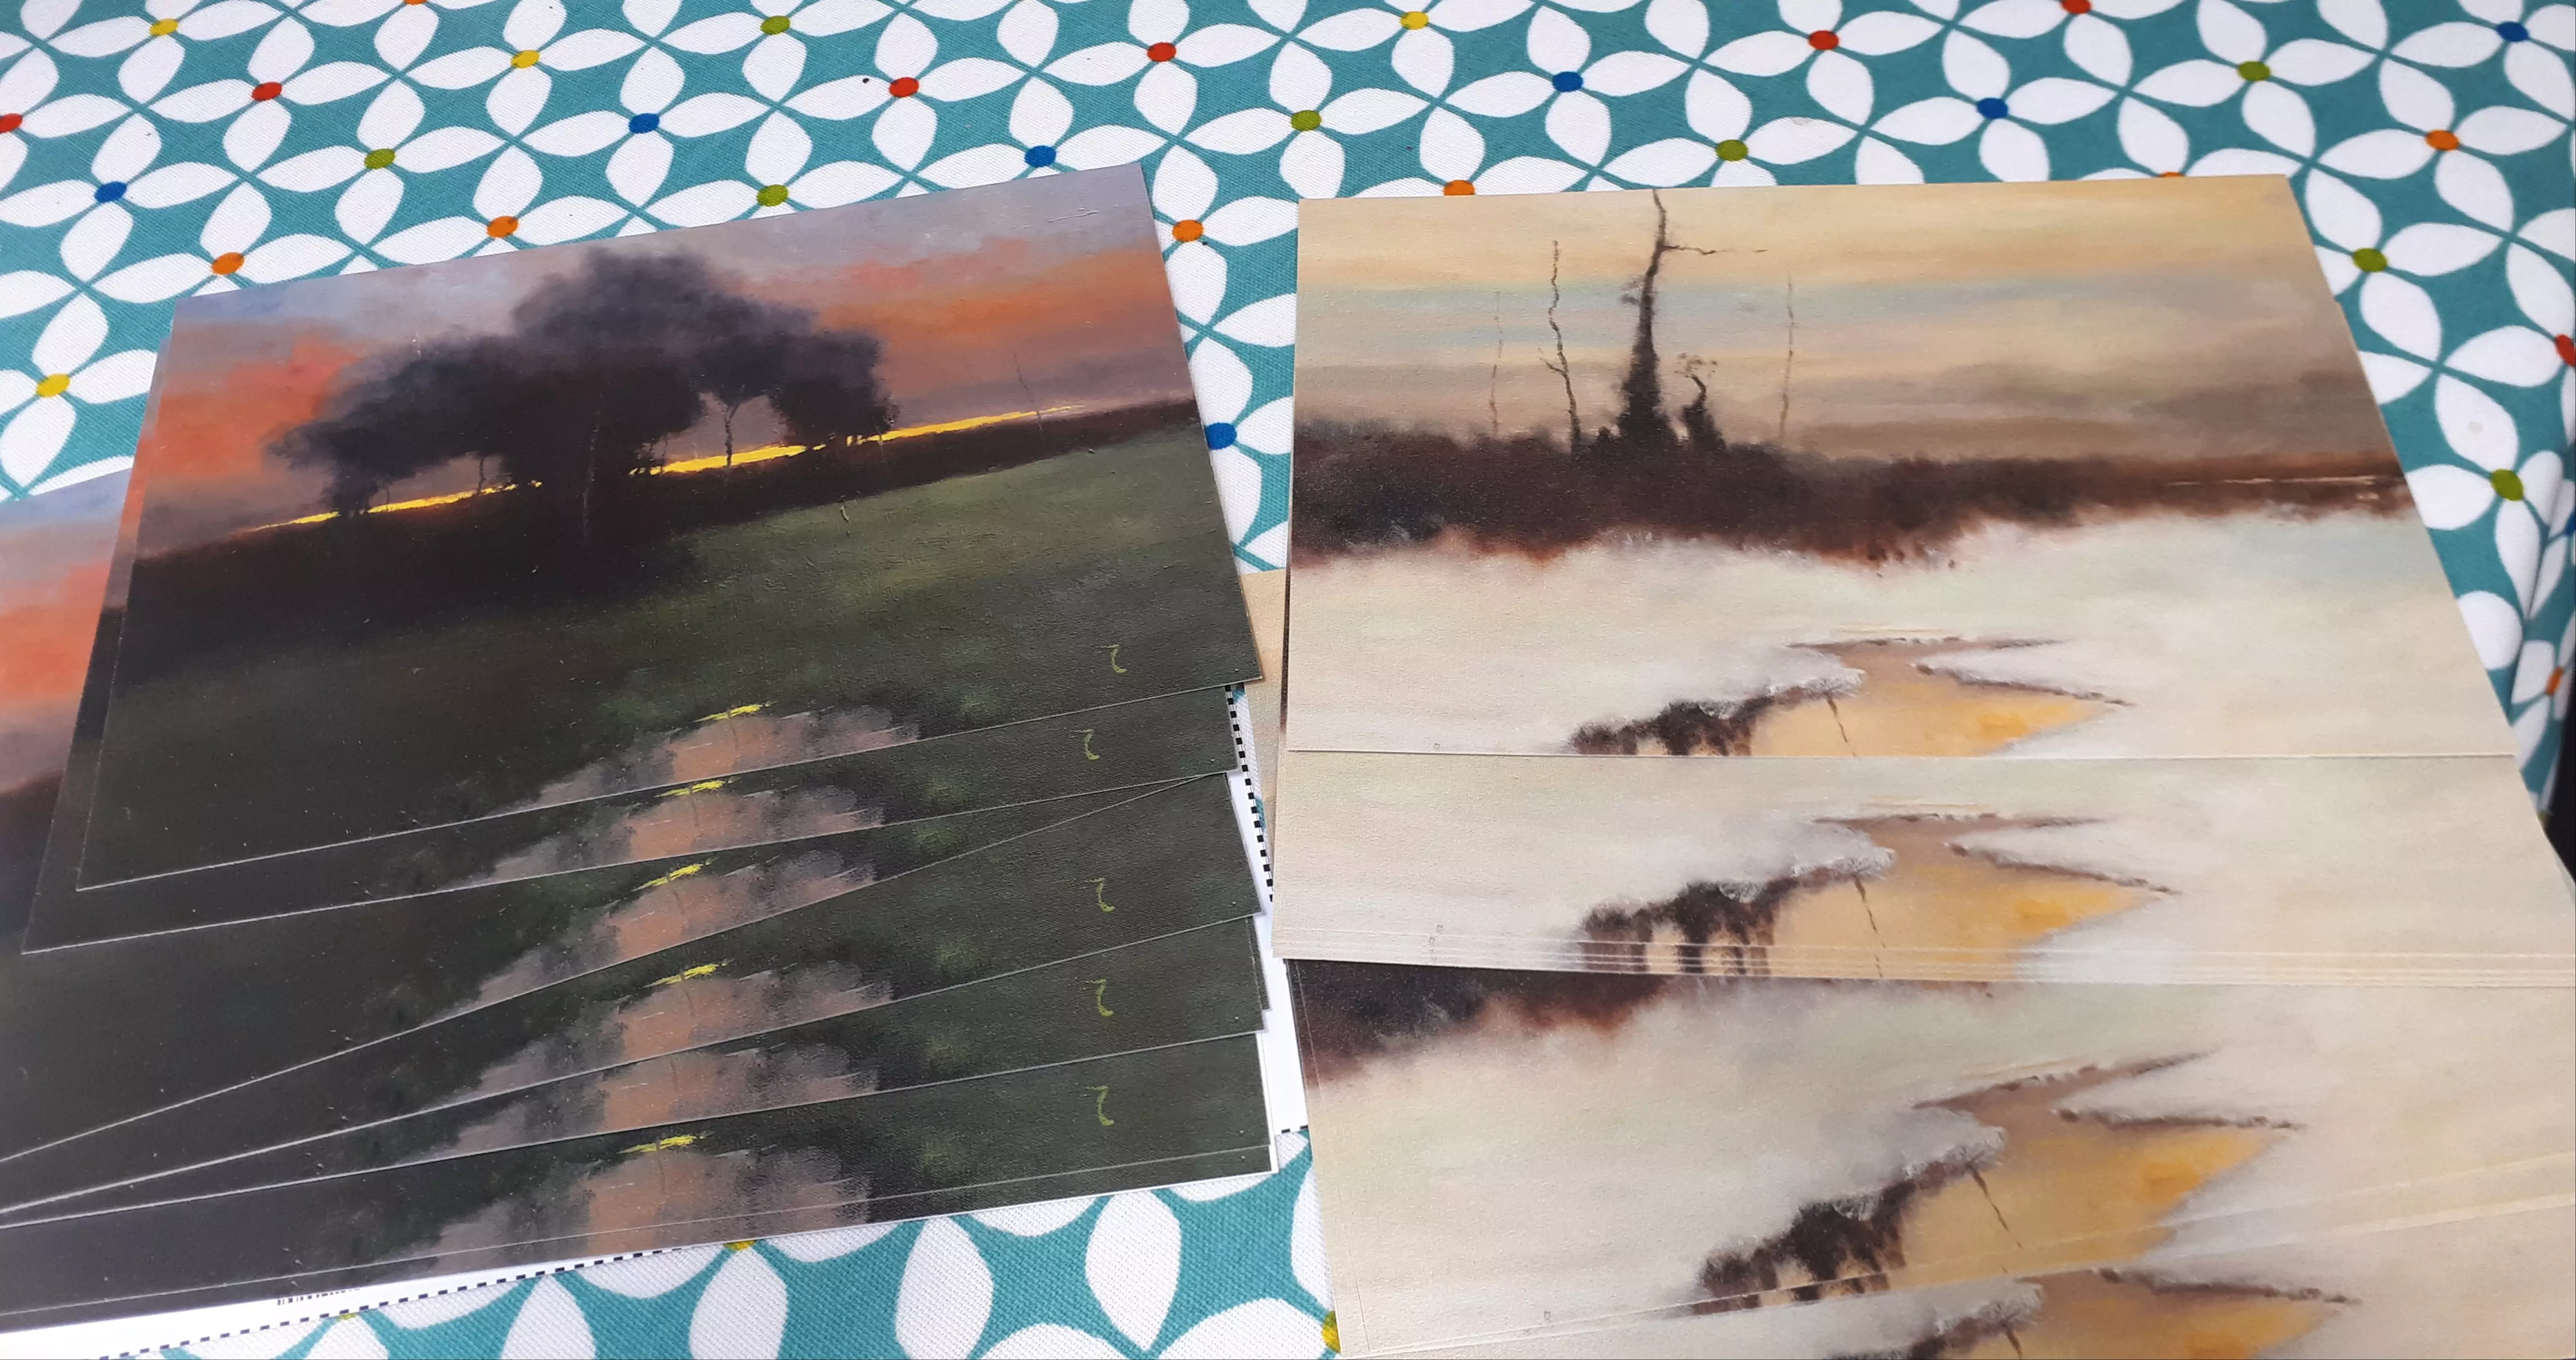 In this last picture we an 
array of postcards spread out in a fan formation. There are 5 postcards in total, all of which are based on gouache paintings. 
At the front of the formation and the only one visible in it's entirety is a post card based on the painting, 'Tall Trees at 
Farran Wood'.